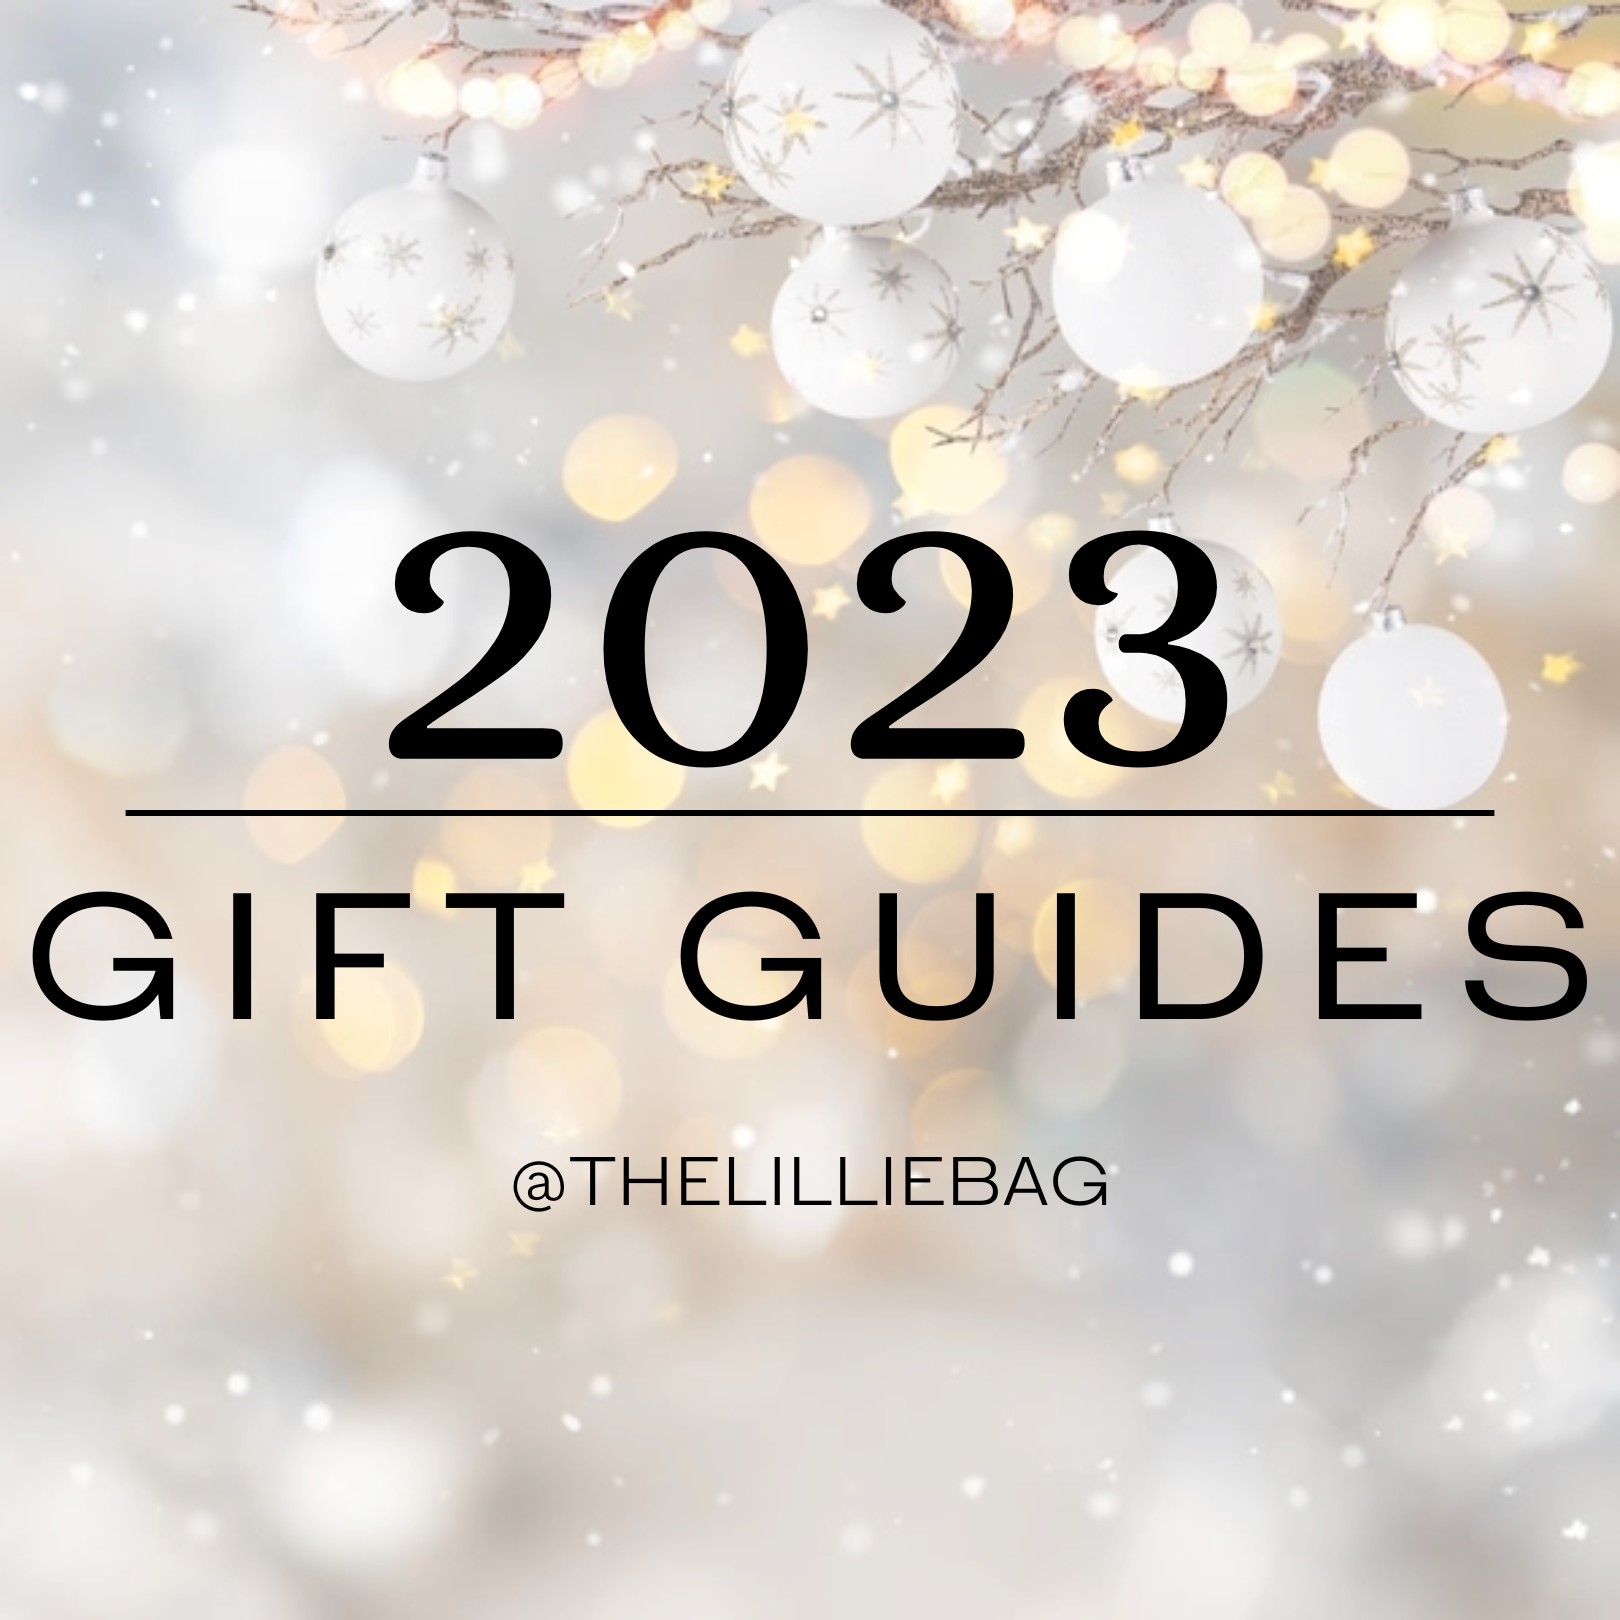 My Top 10 Gifts For 2023: Christmas Gift Guide - Ellis Tuesday